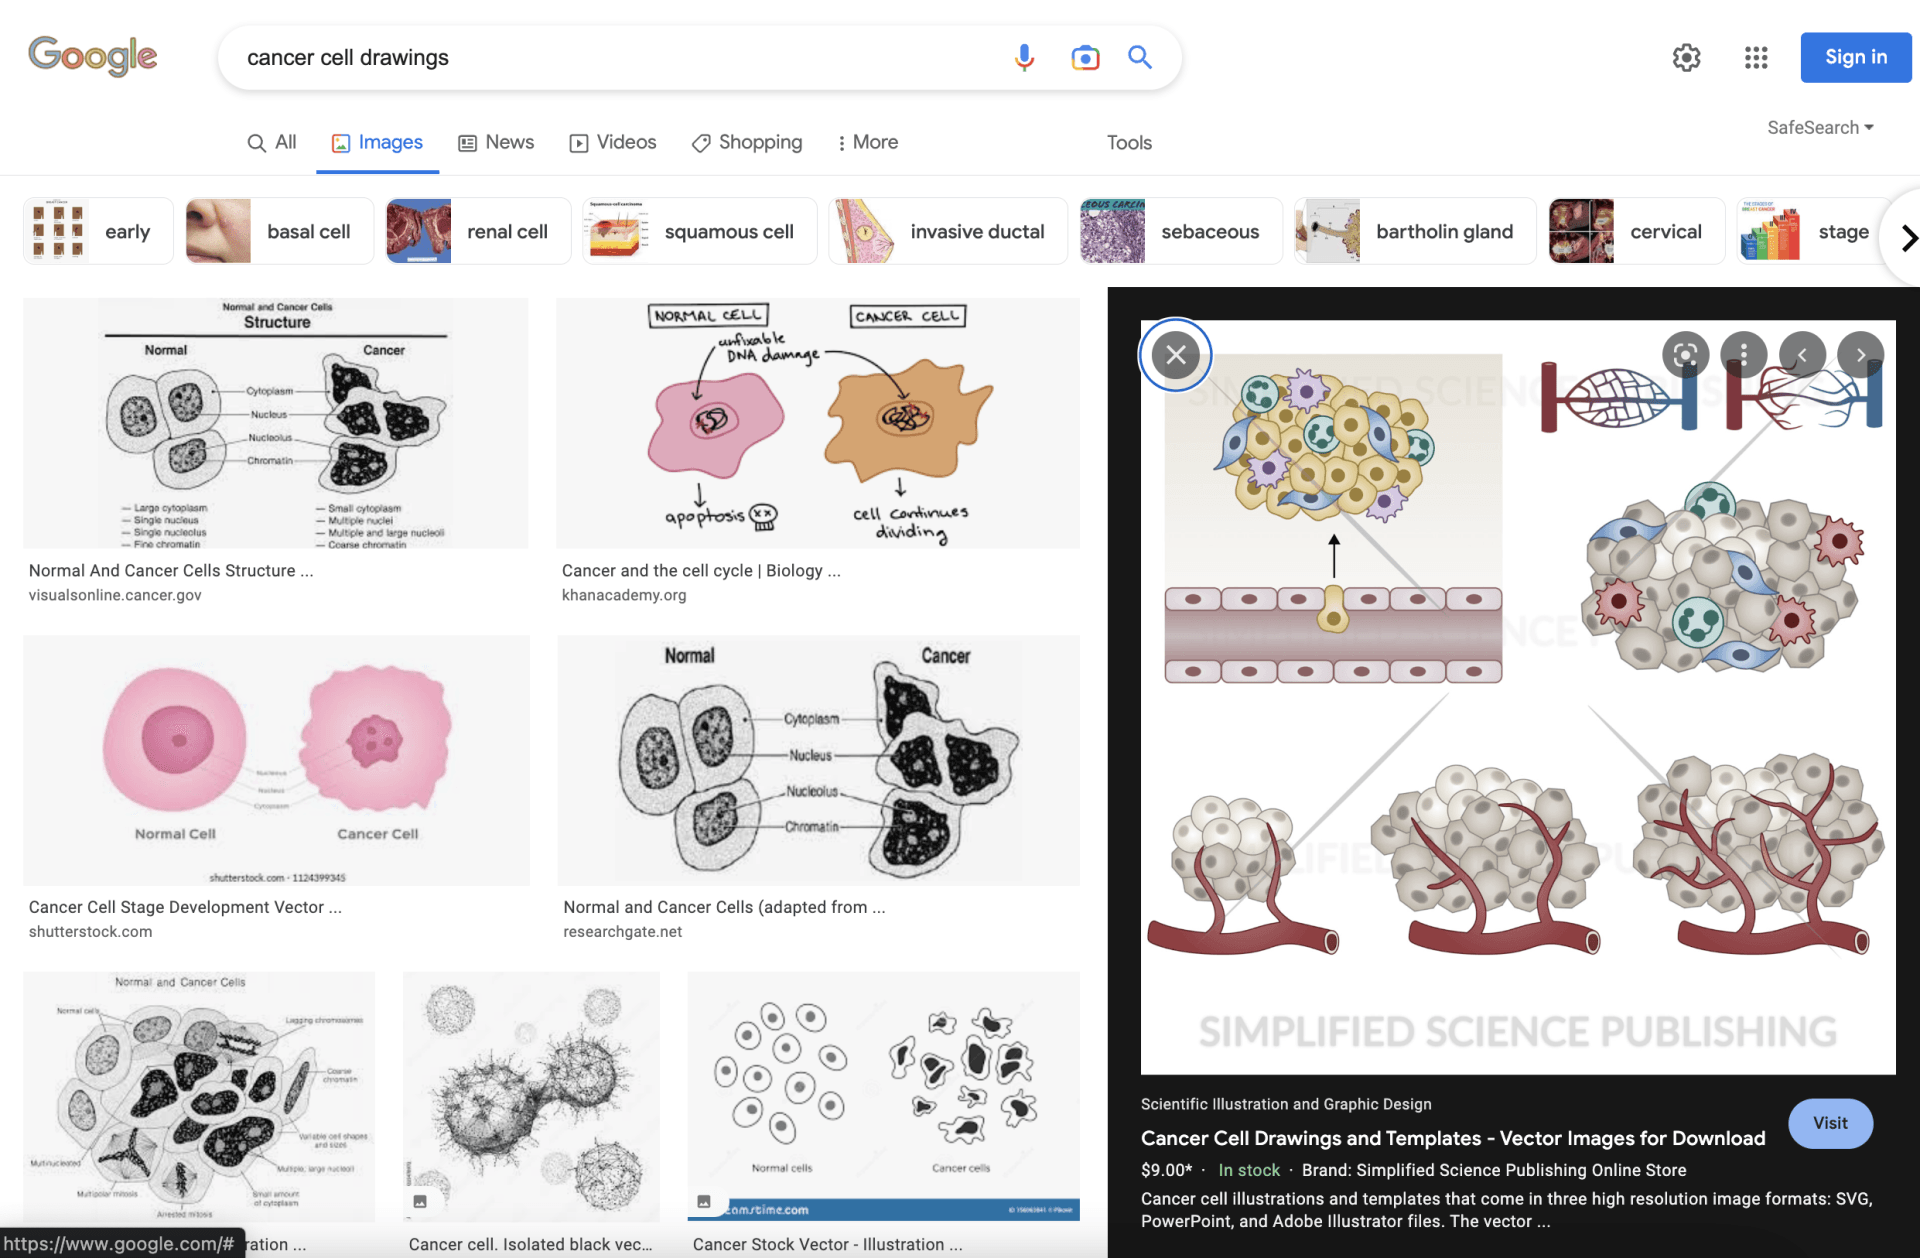 Vector image search results for cancer cell drawings